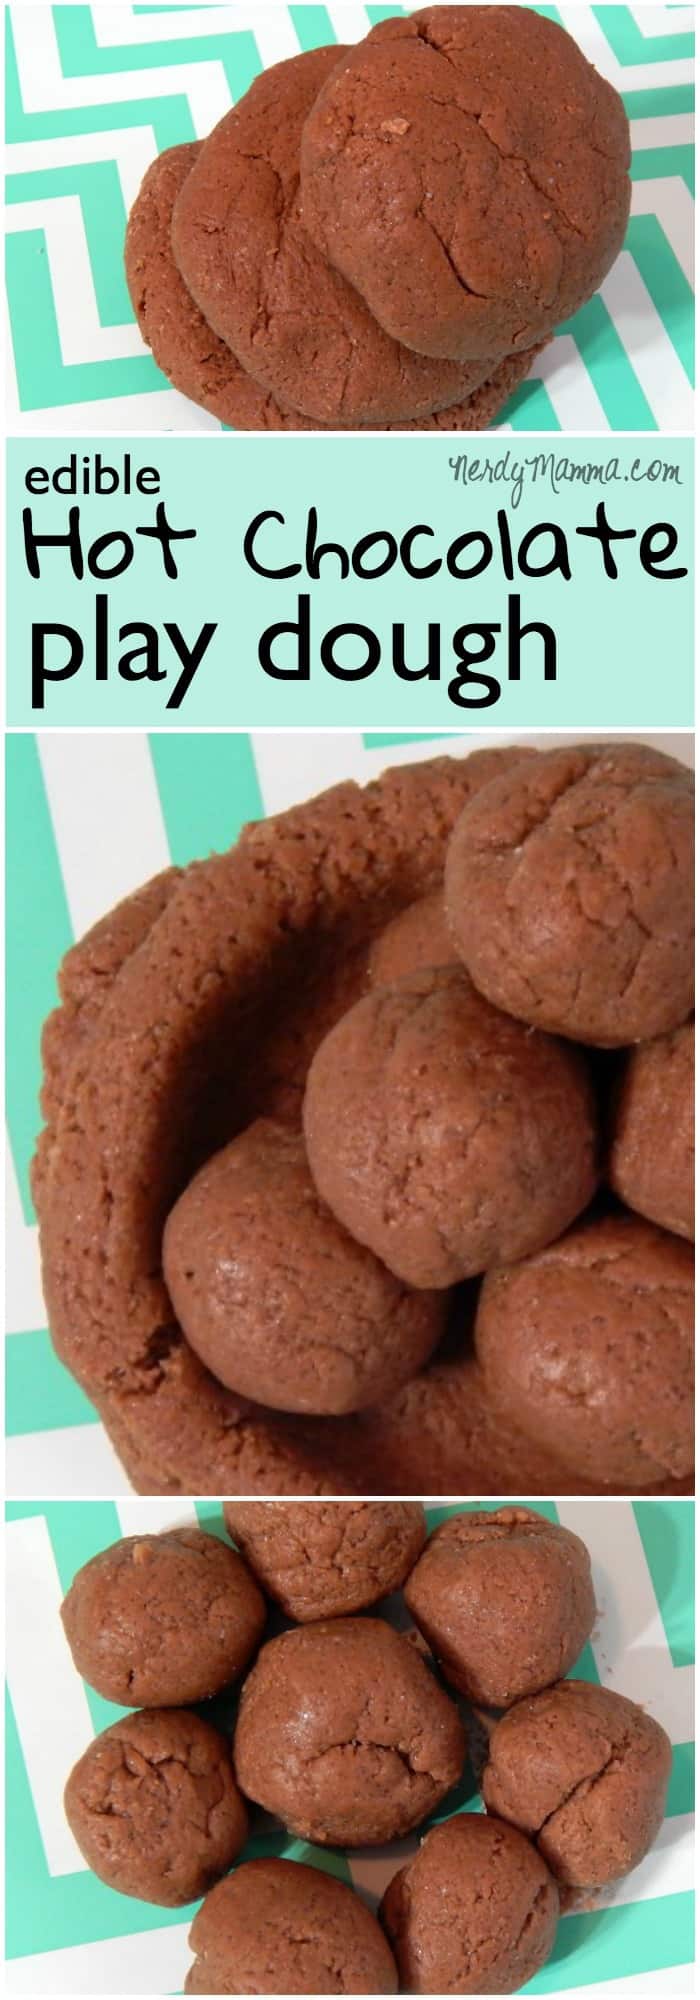 My kiddos had so much fun playing with this sweet-smelling hot chocolate play dough (and it's totally edible). I loved how easy it was to make...